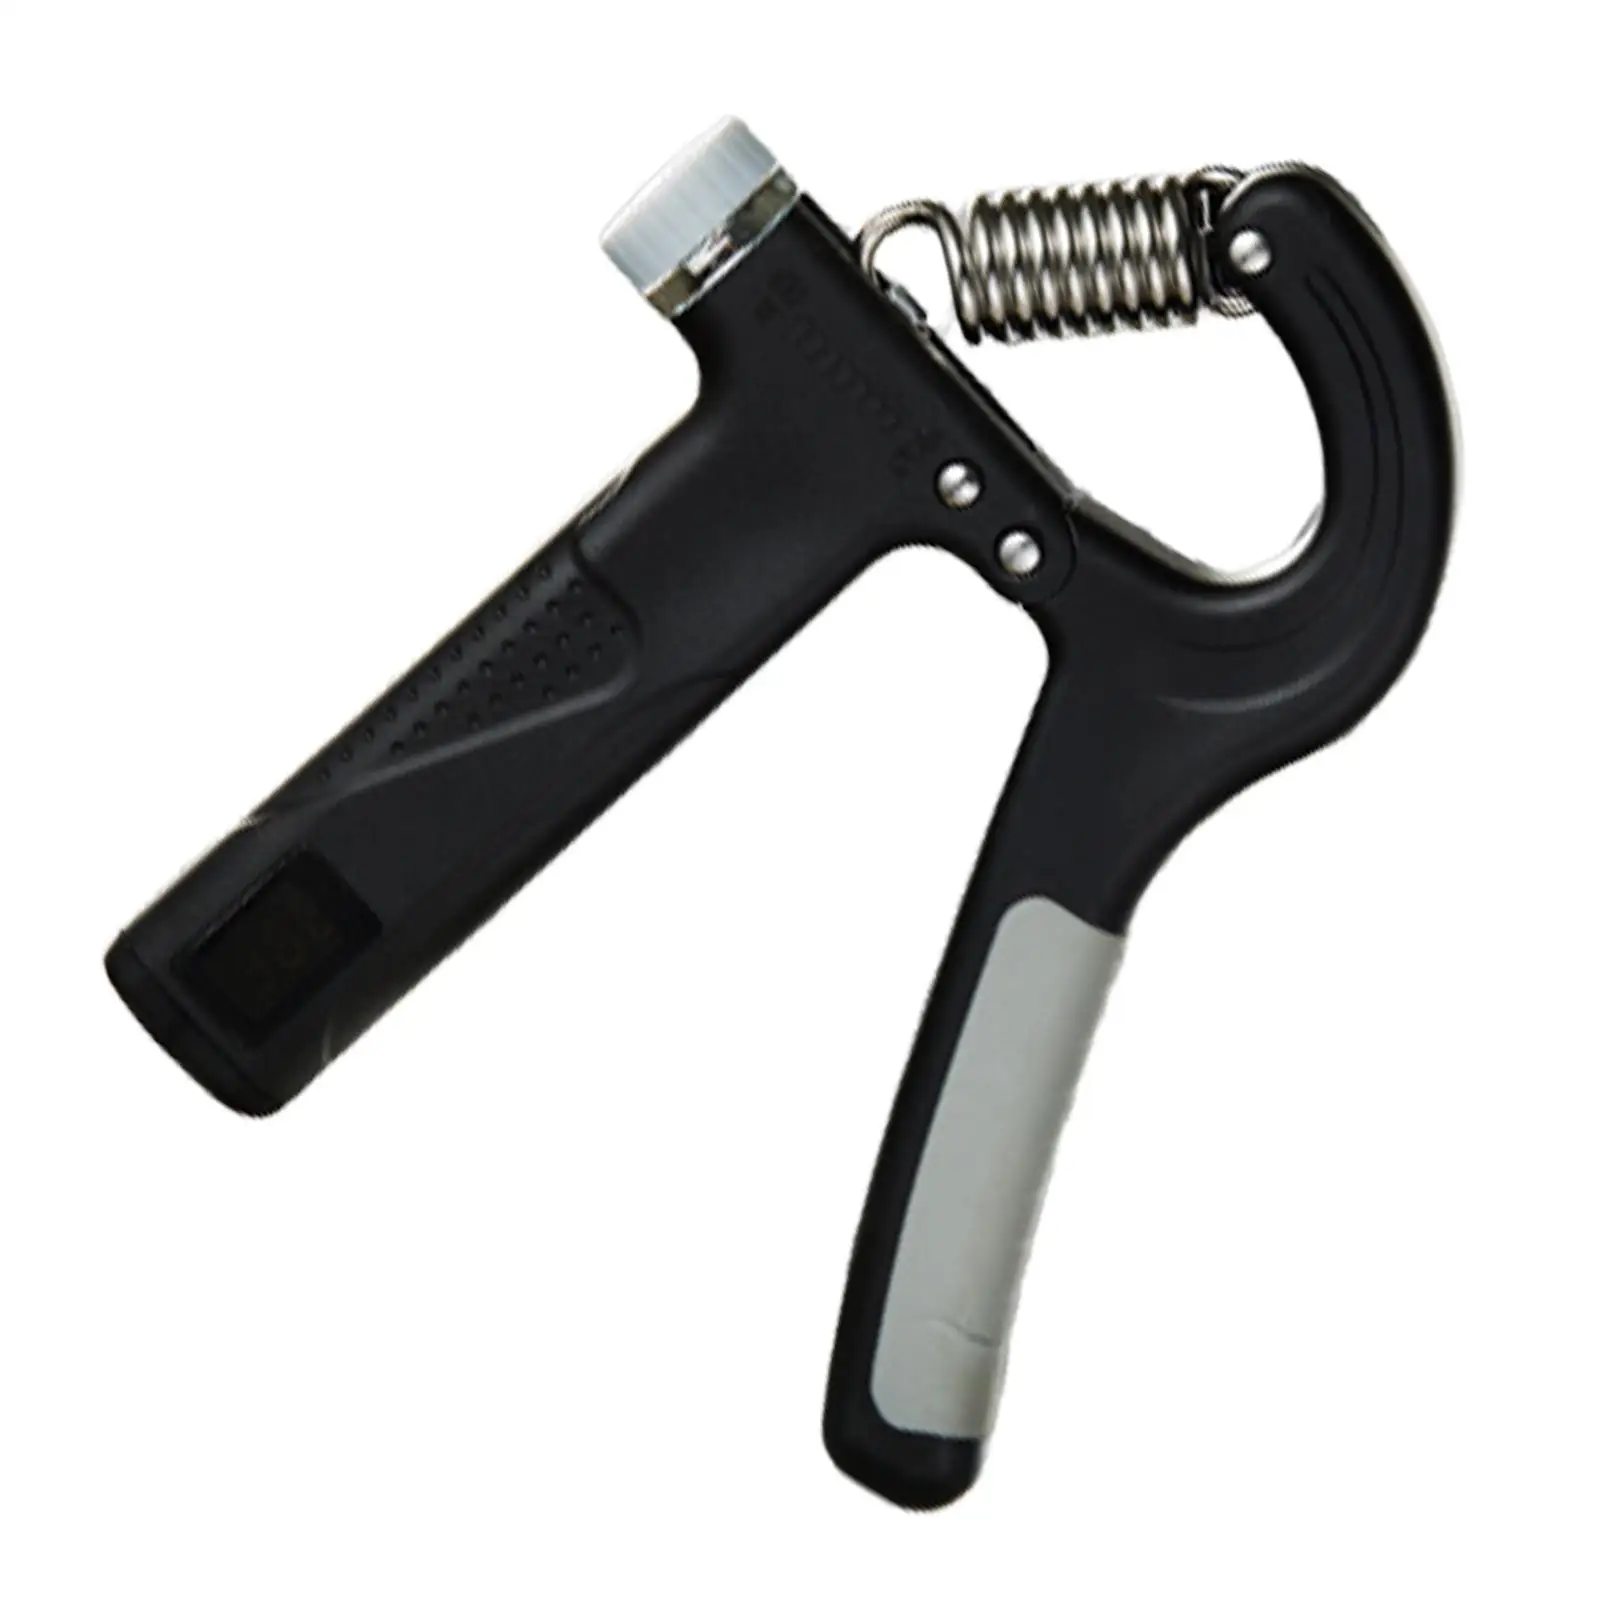 Hand Grip Strengthener with Counter Gym Finger Exerciser